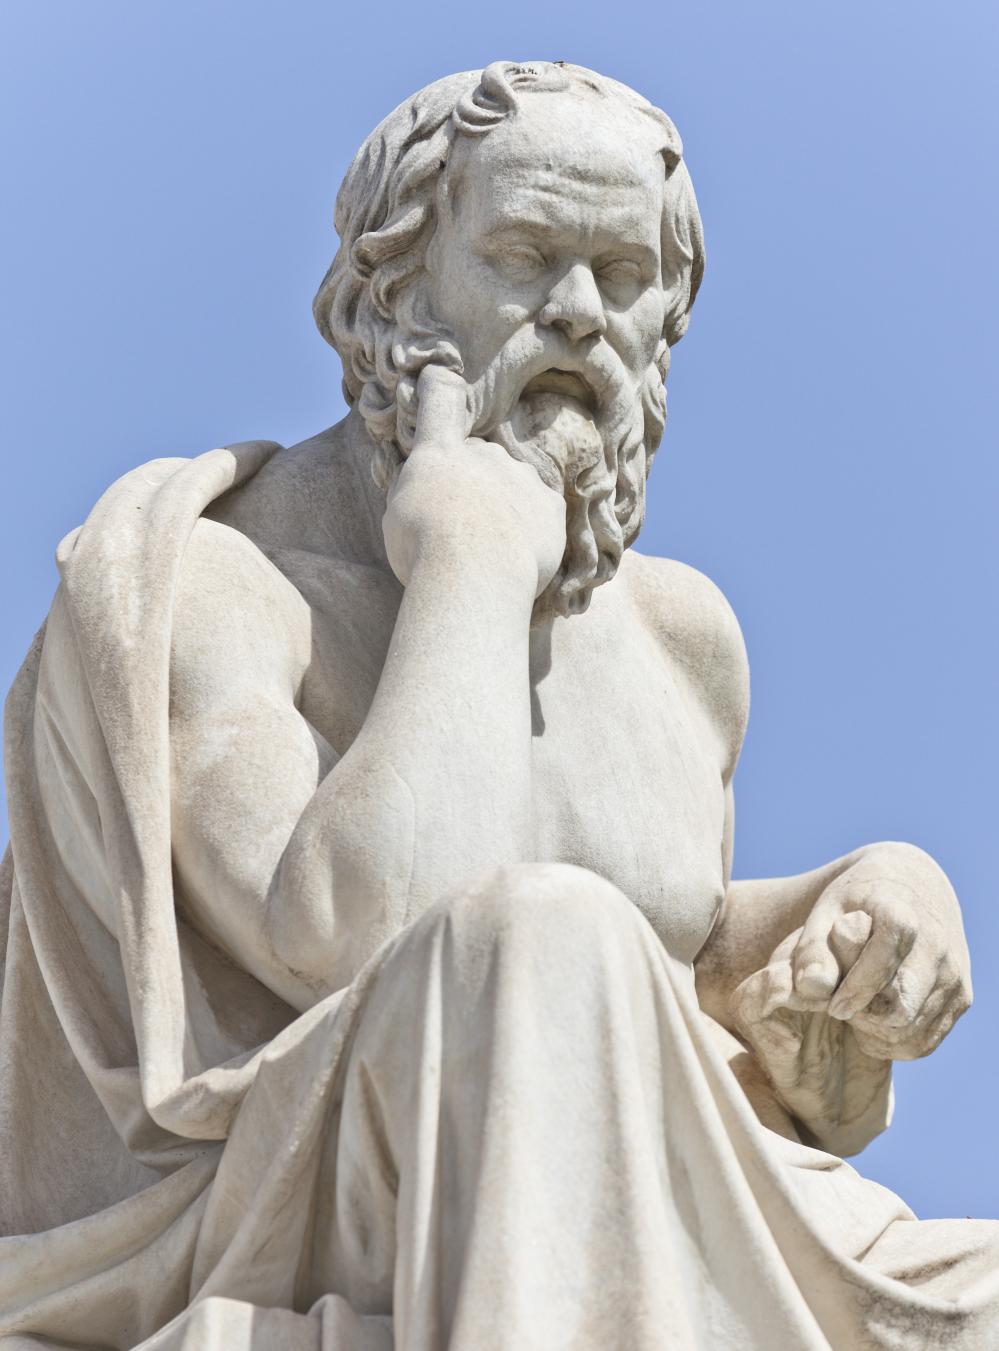 Plato's "Apology" And The Wisdom Of Socrates | Classical Wisdom Weekly